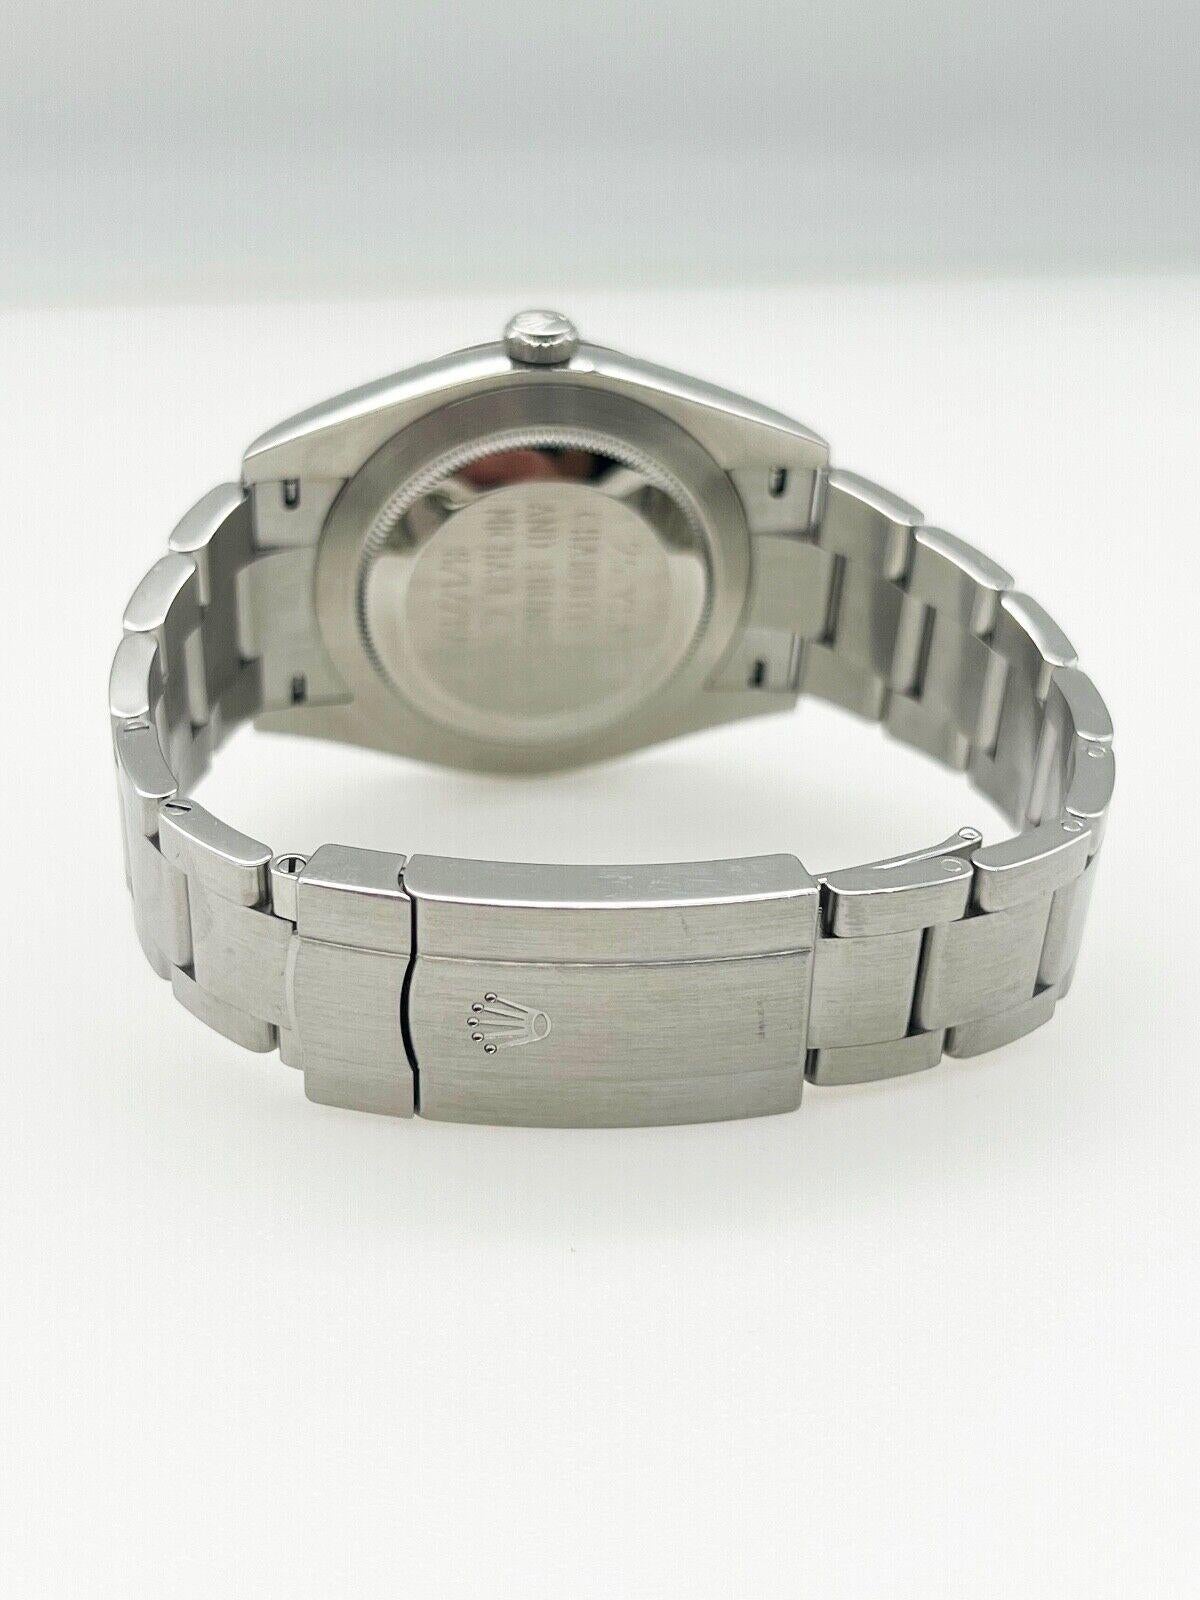 Rolex 124300 Oyster Perpetual 41mm Silver Dial Stainless Steel Box Papers 2021 In Excellent Condition For Sale In San Diego, CA